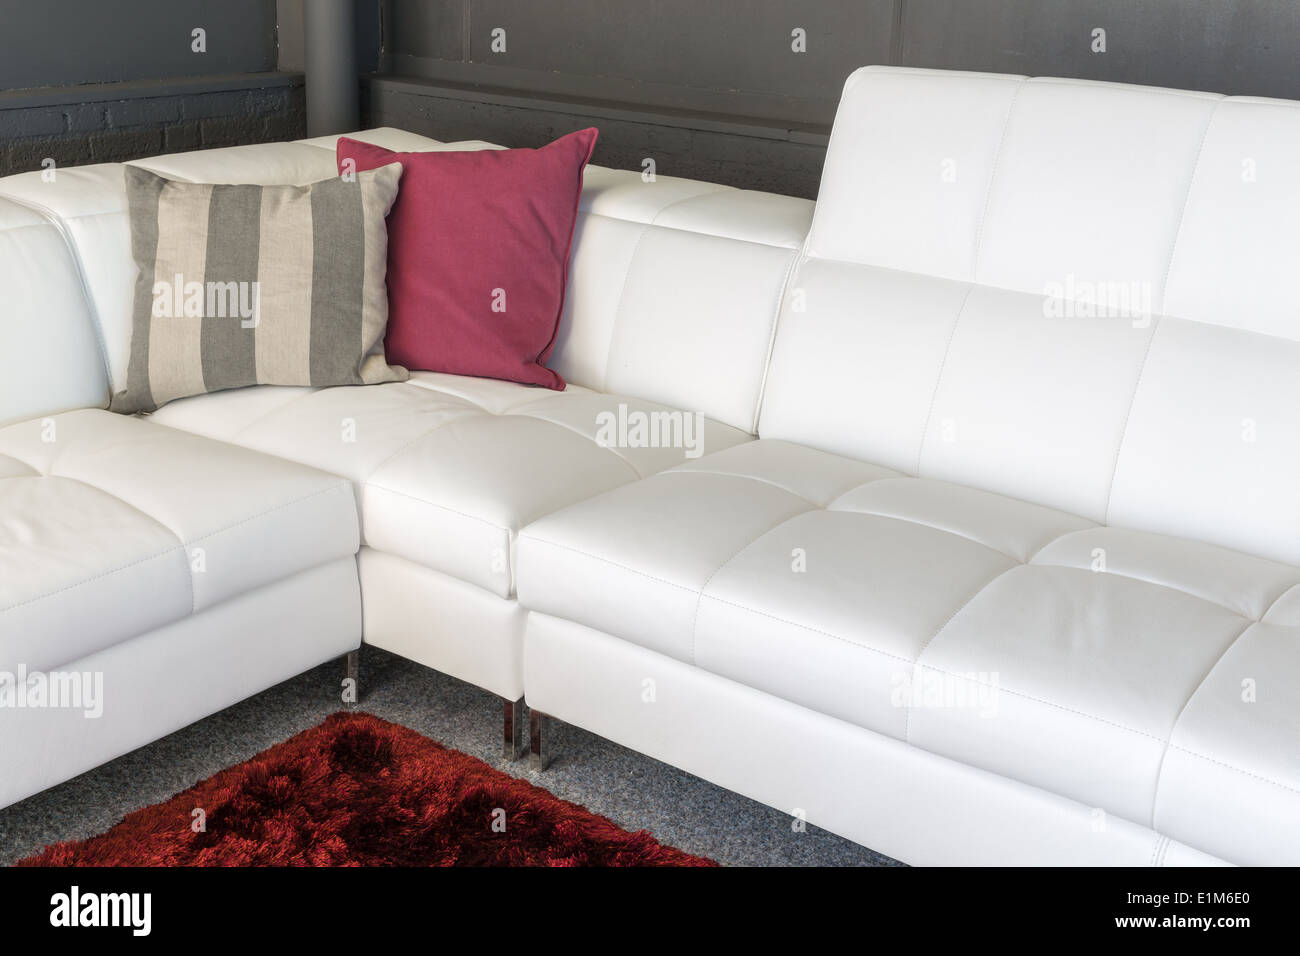 Couch with white upholstery and two pillows Stock Photo